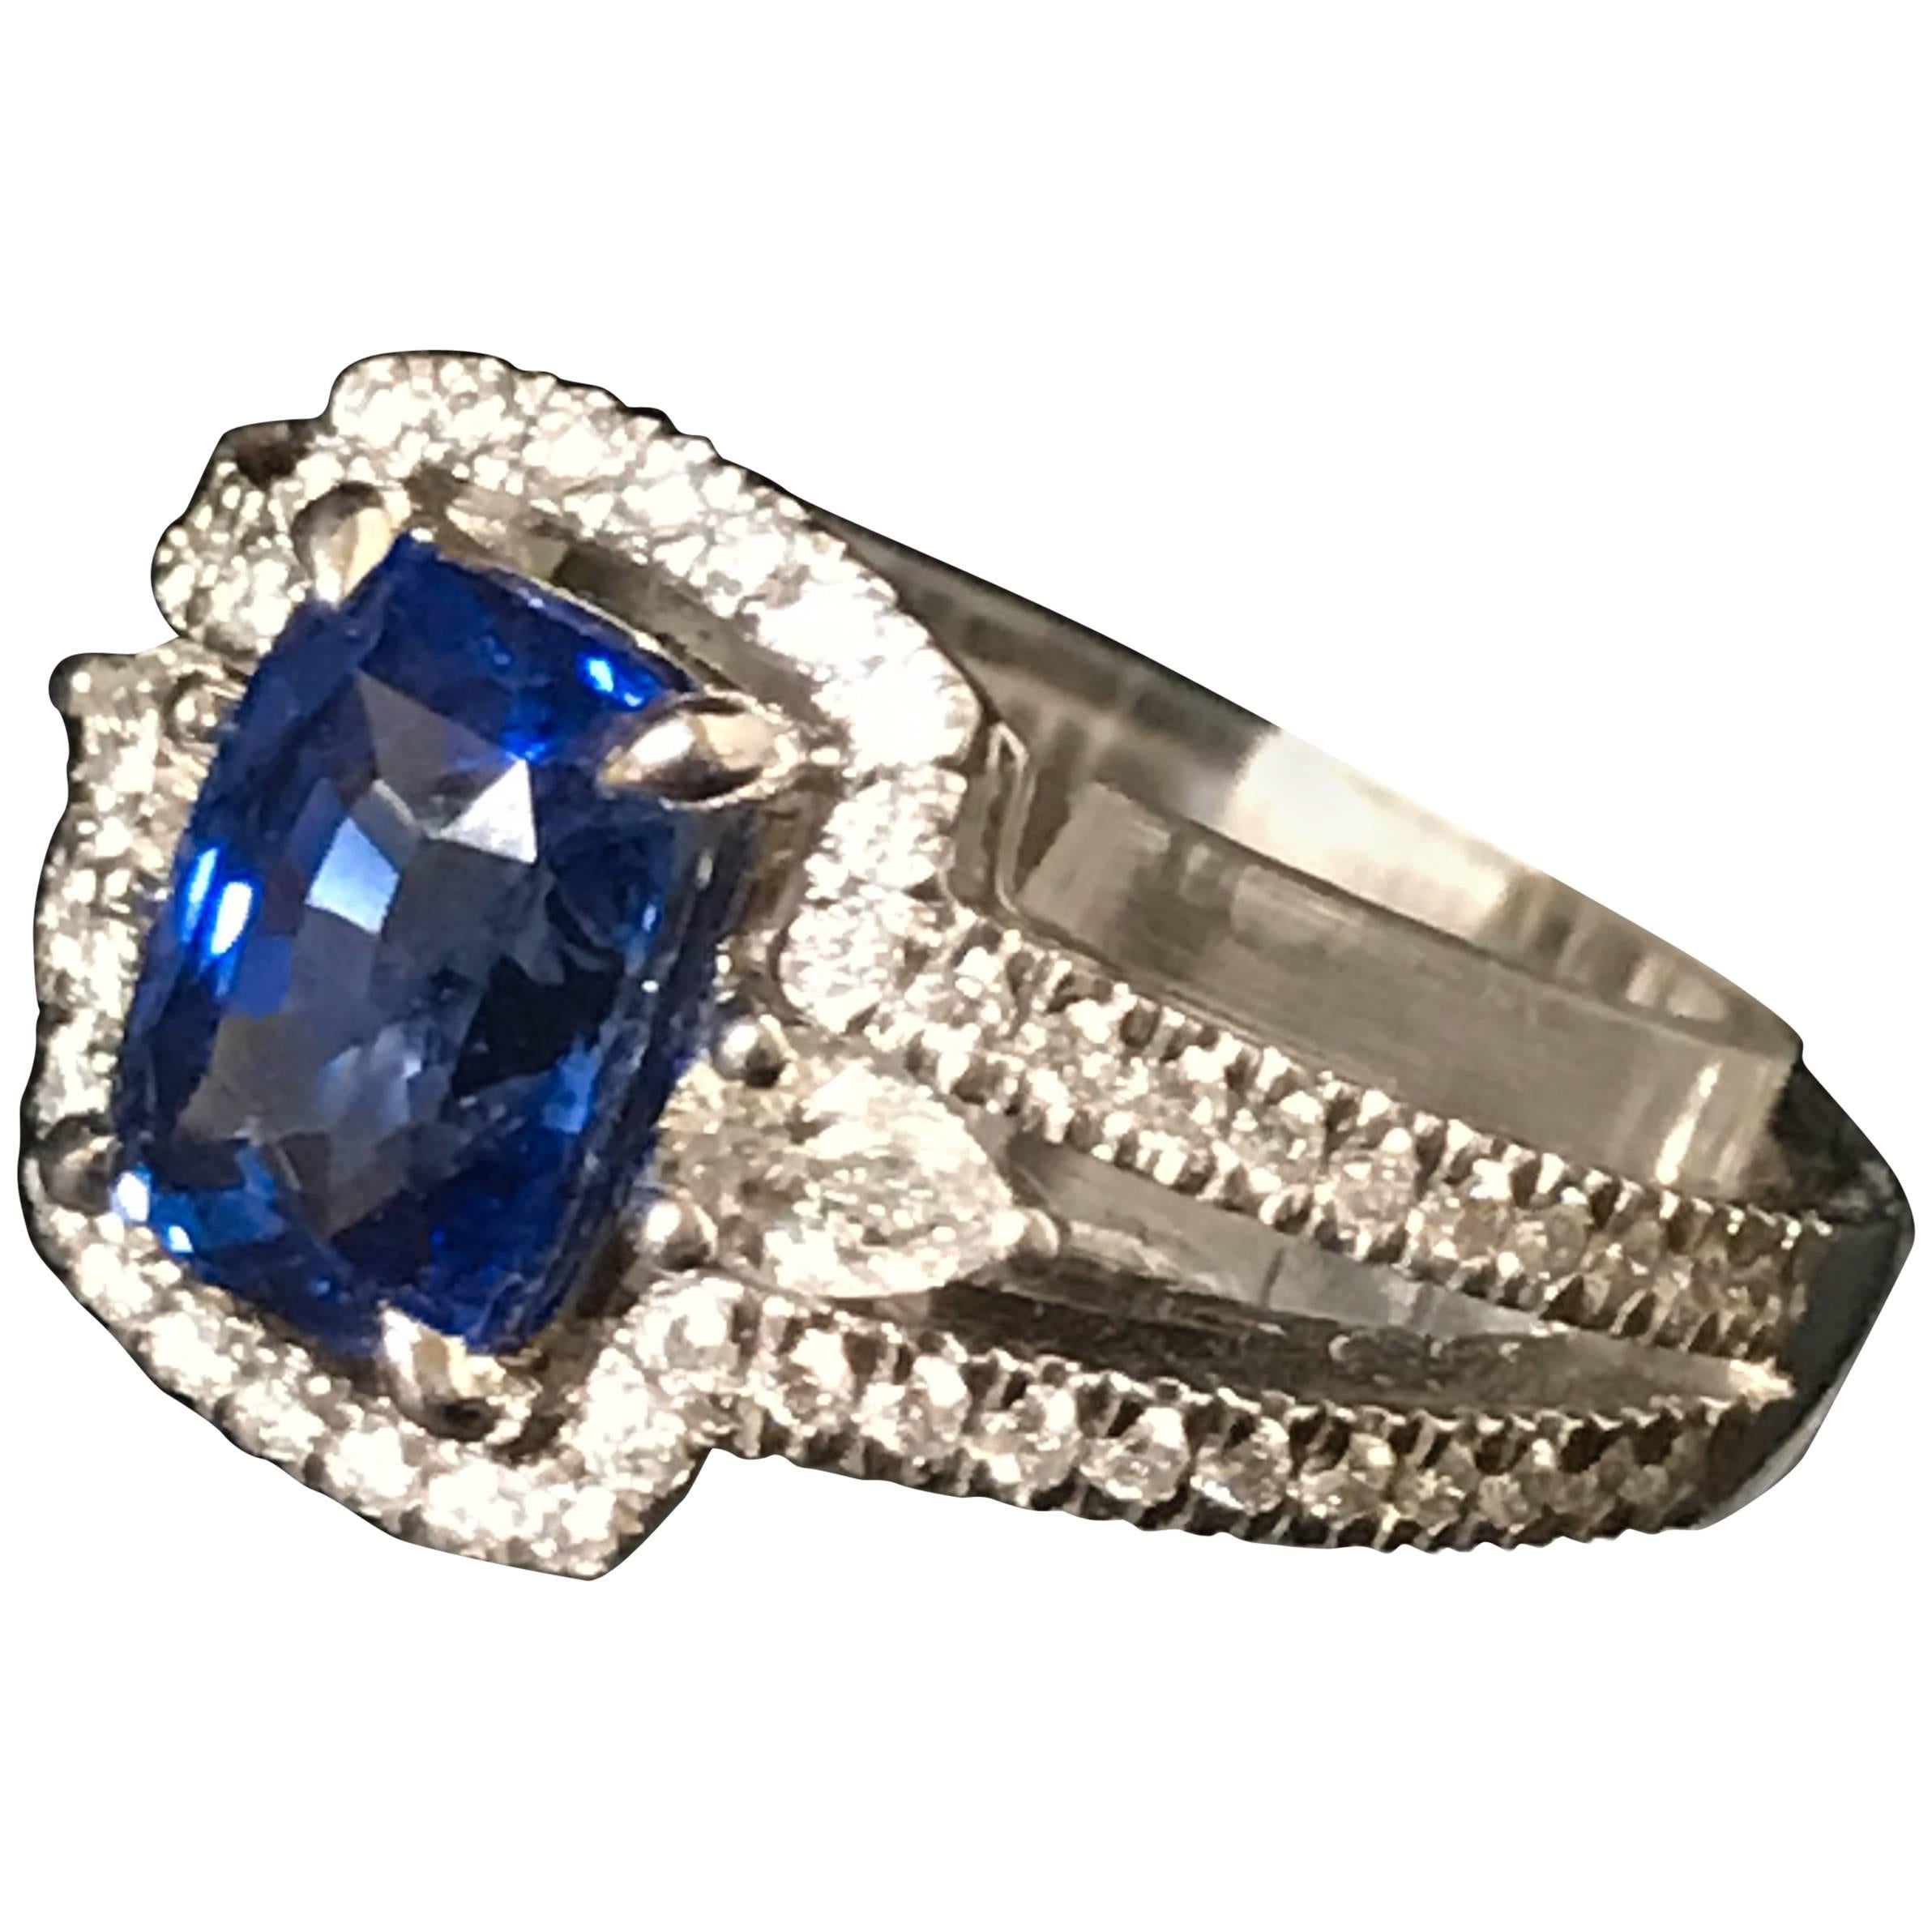 Discover this Cushion Ceylon Sapphire Pear Shaped Diamonds White Gold Ring.
White Gold 18 Carat
2 Pear Shaped Diamonds 0.36 Carat
62 Diamonds 0.36 Carat
Cushion Ceylon Sapphire 2.64 Carat
Size : 53